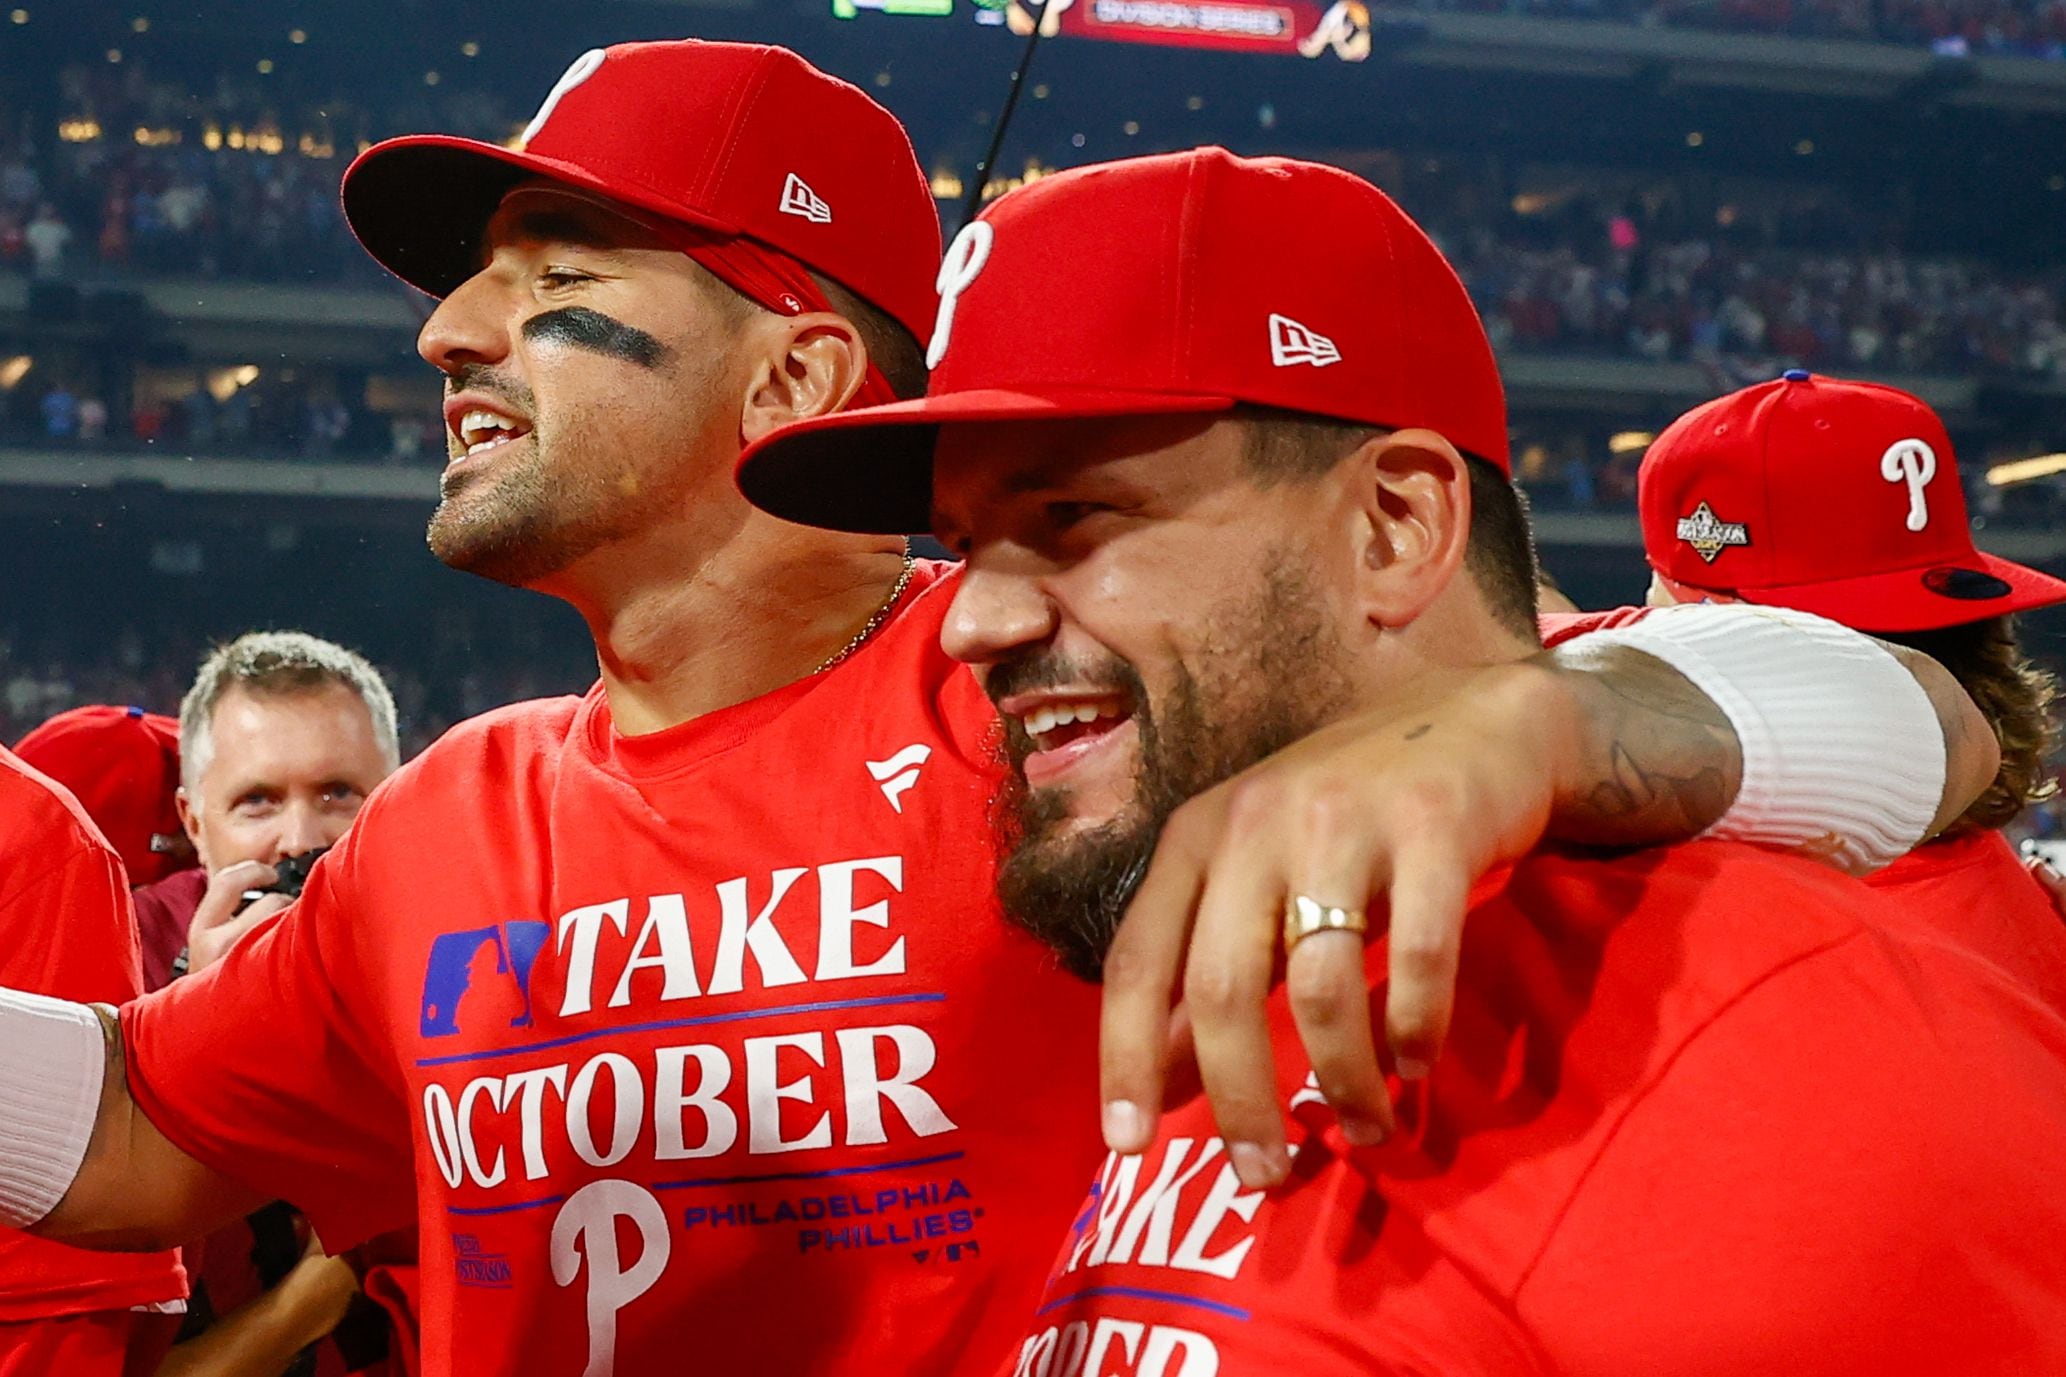 Phillies-Braves playoffs: Schedule, game times, tickets, pitchers, and MLB  rules